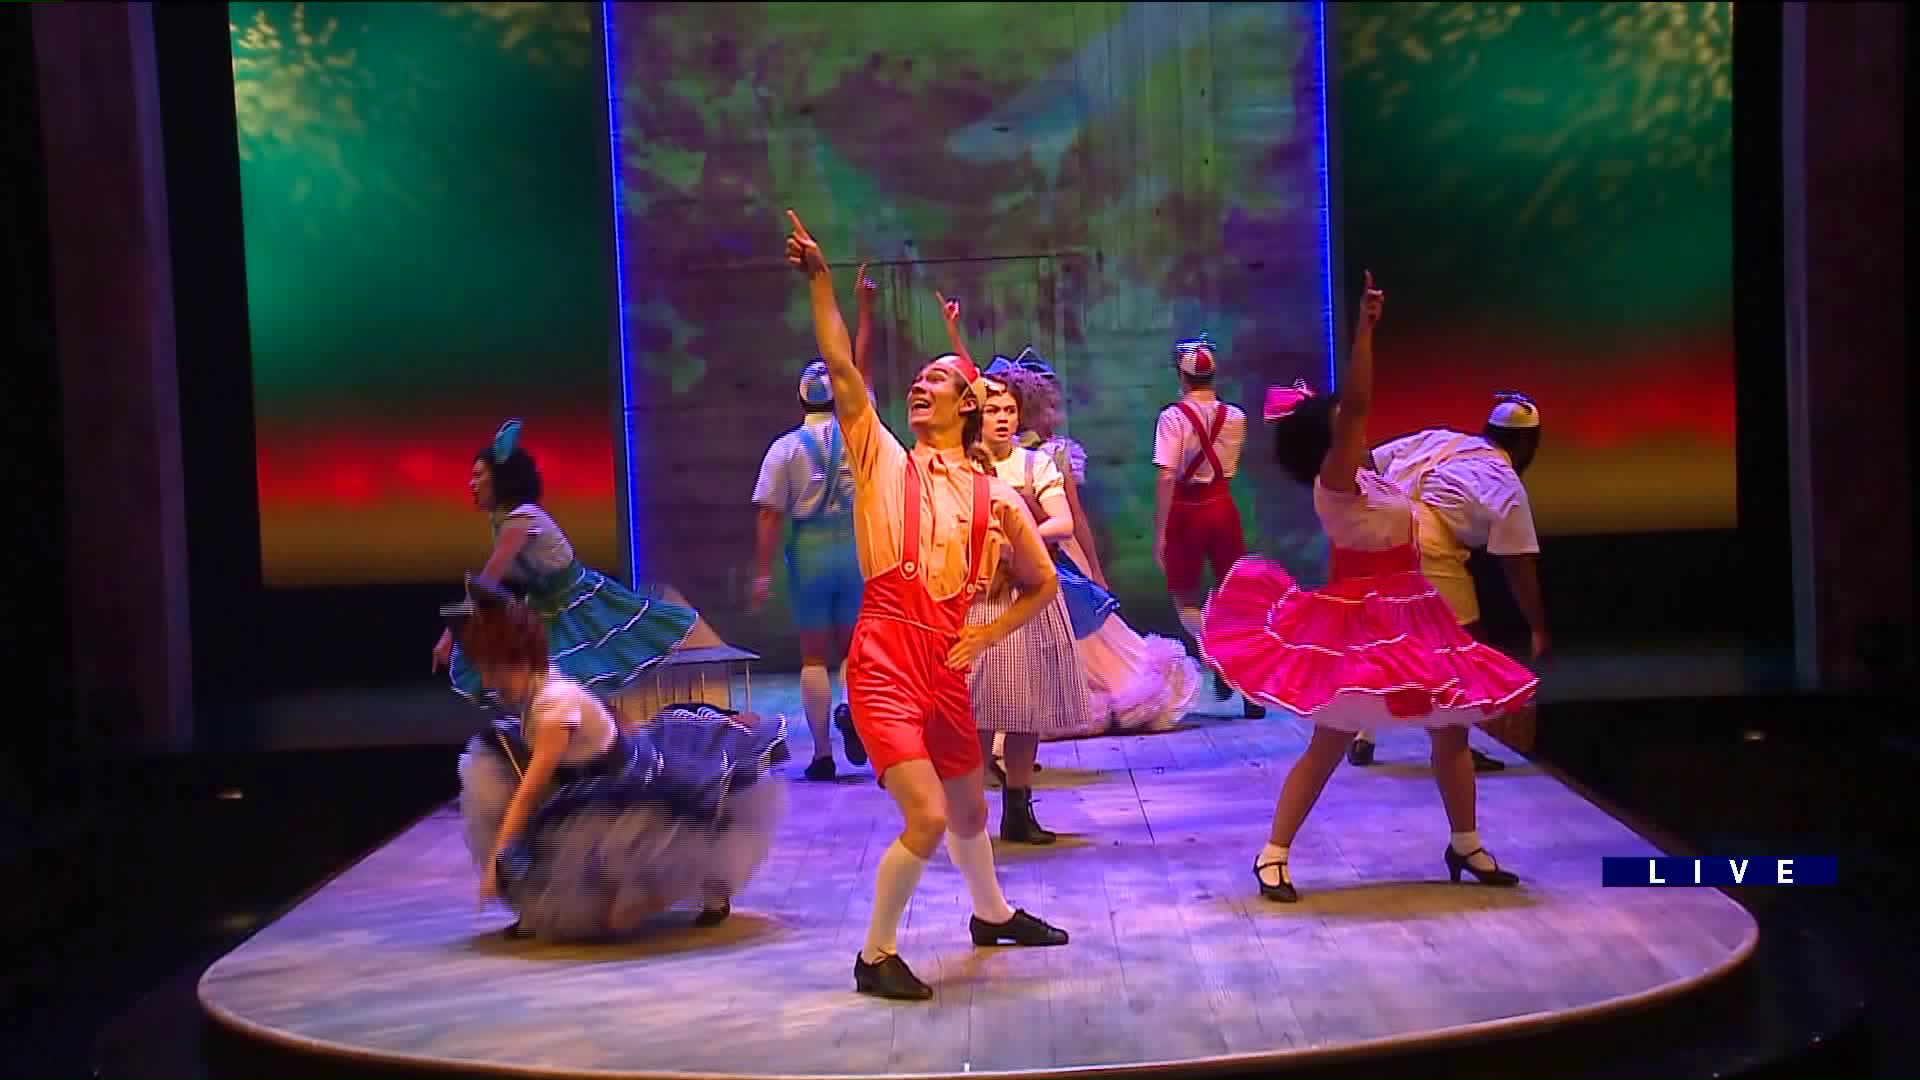 Around Town checks out The Wizard of Oz at Chicago Shakespeare Theater